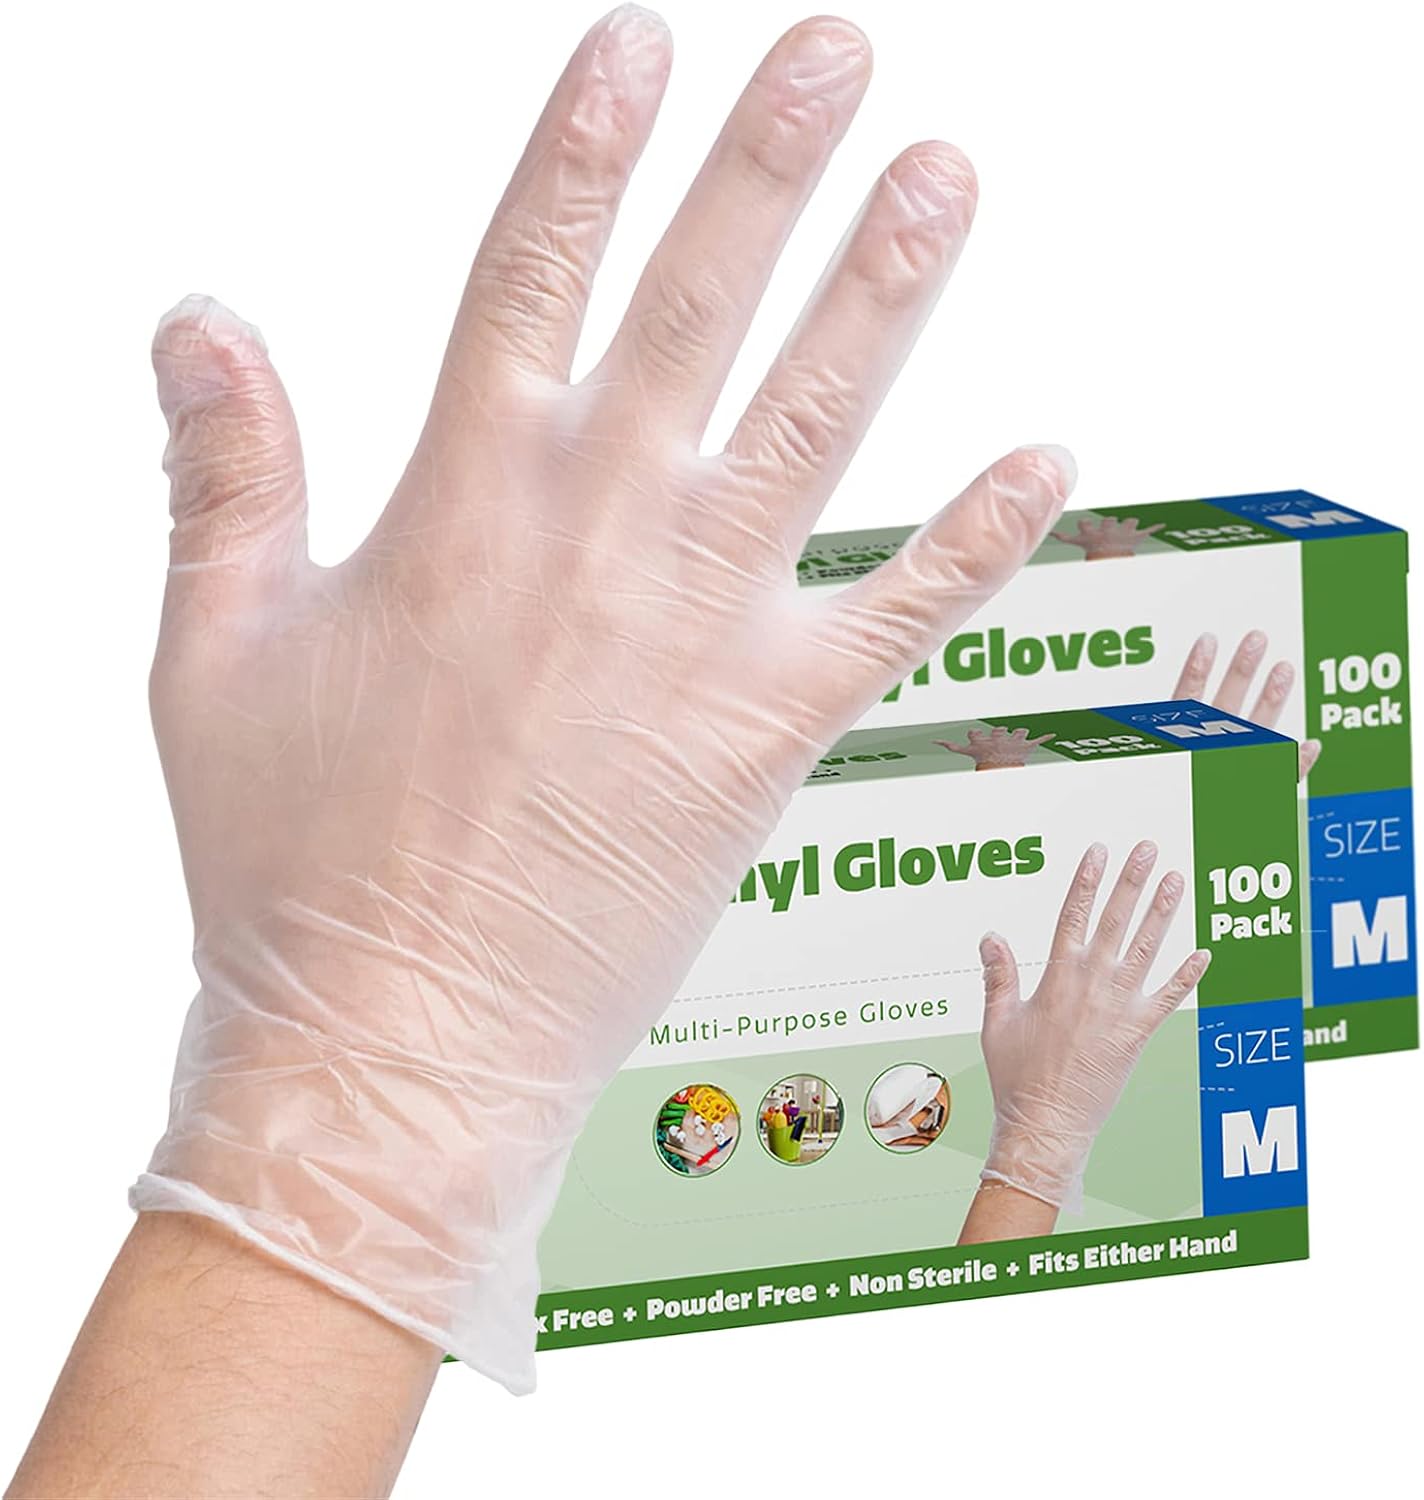 200 Pack] Clear Powder Free Vinyl Disposable Plastic Gloves